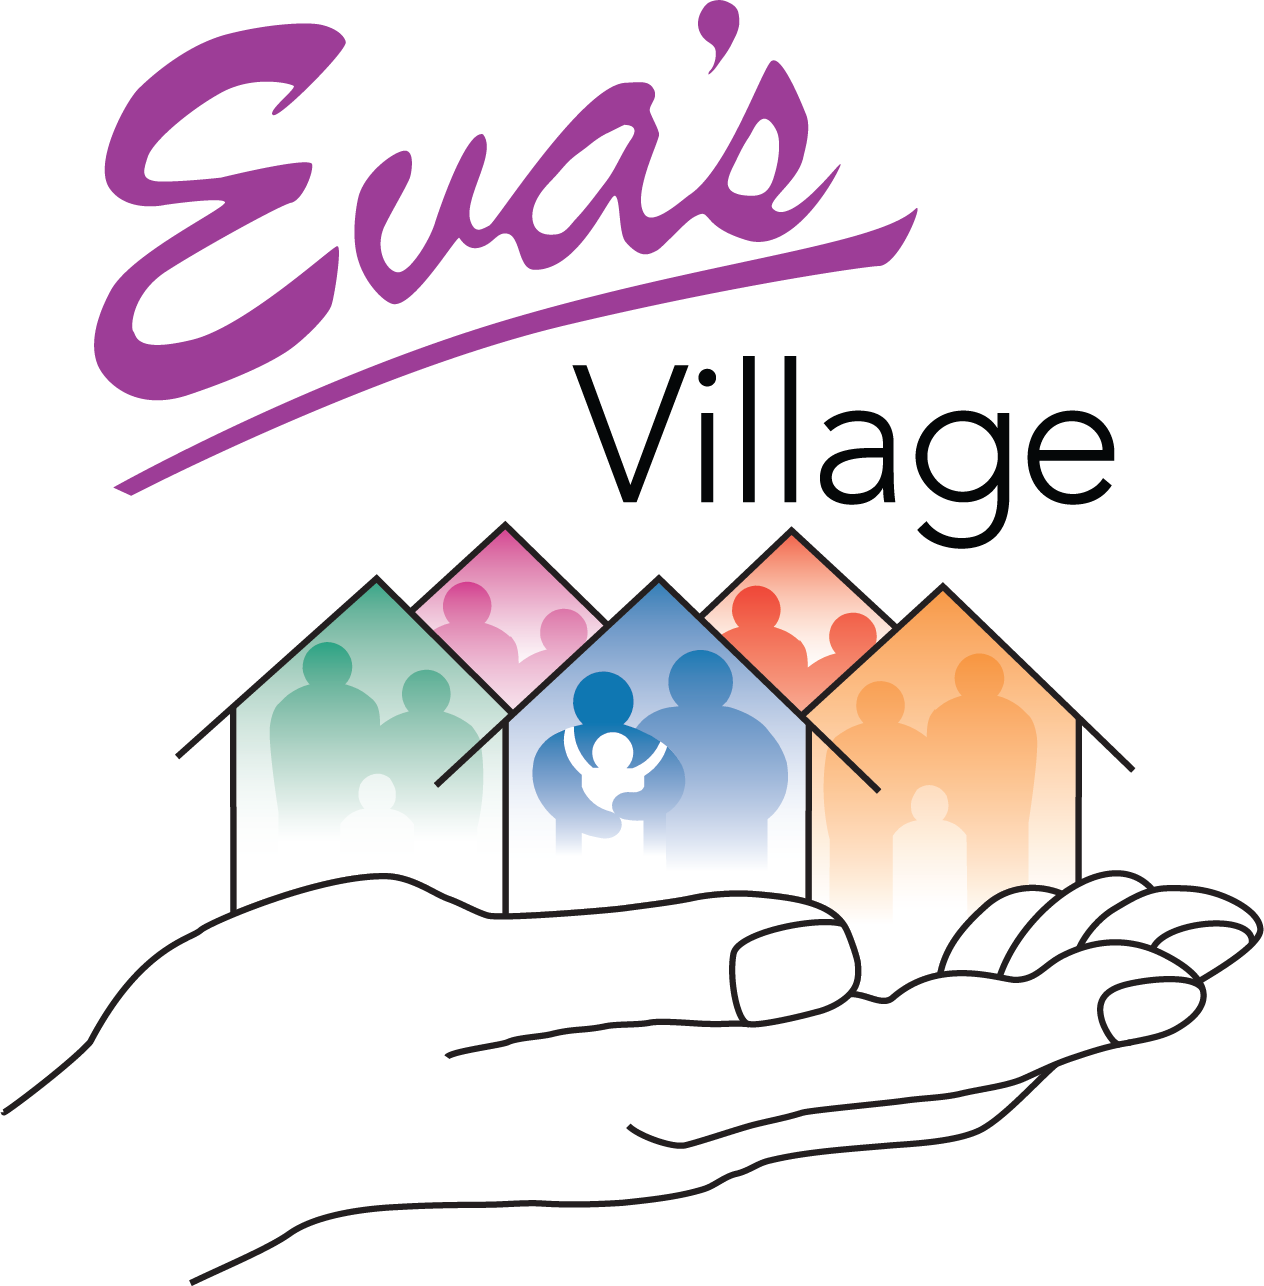 The mission of Eva's Village is to provide care and support for people who are struggling with poverty, hunger, homelessness, and addiction.